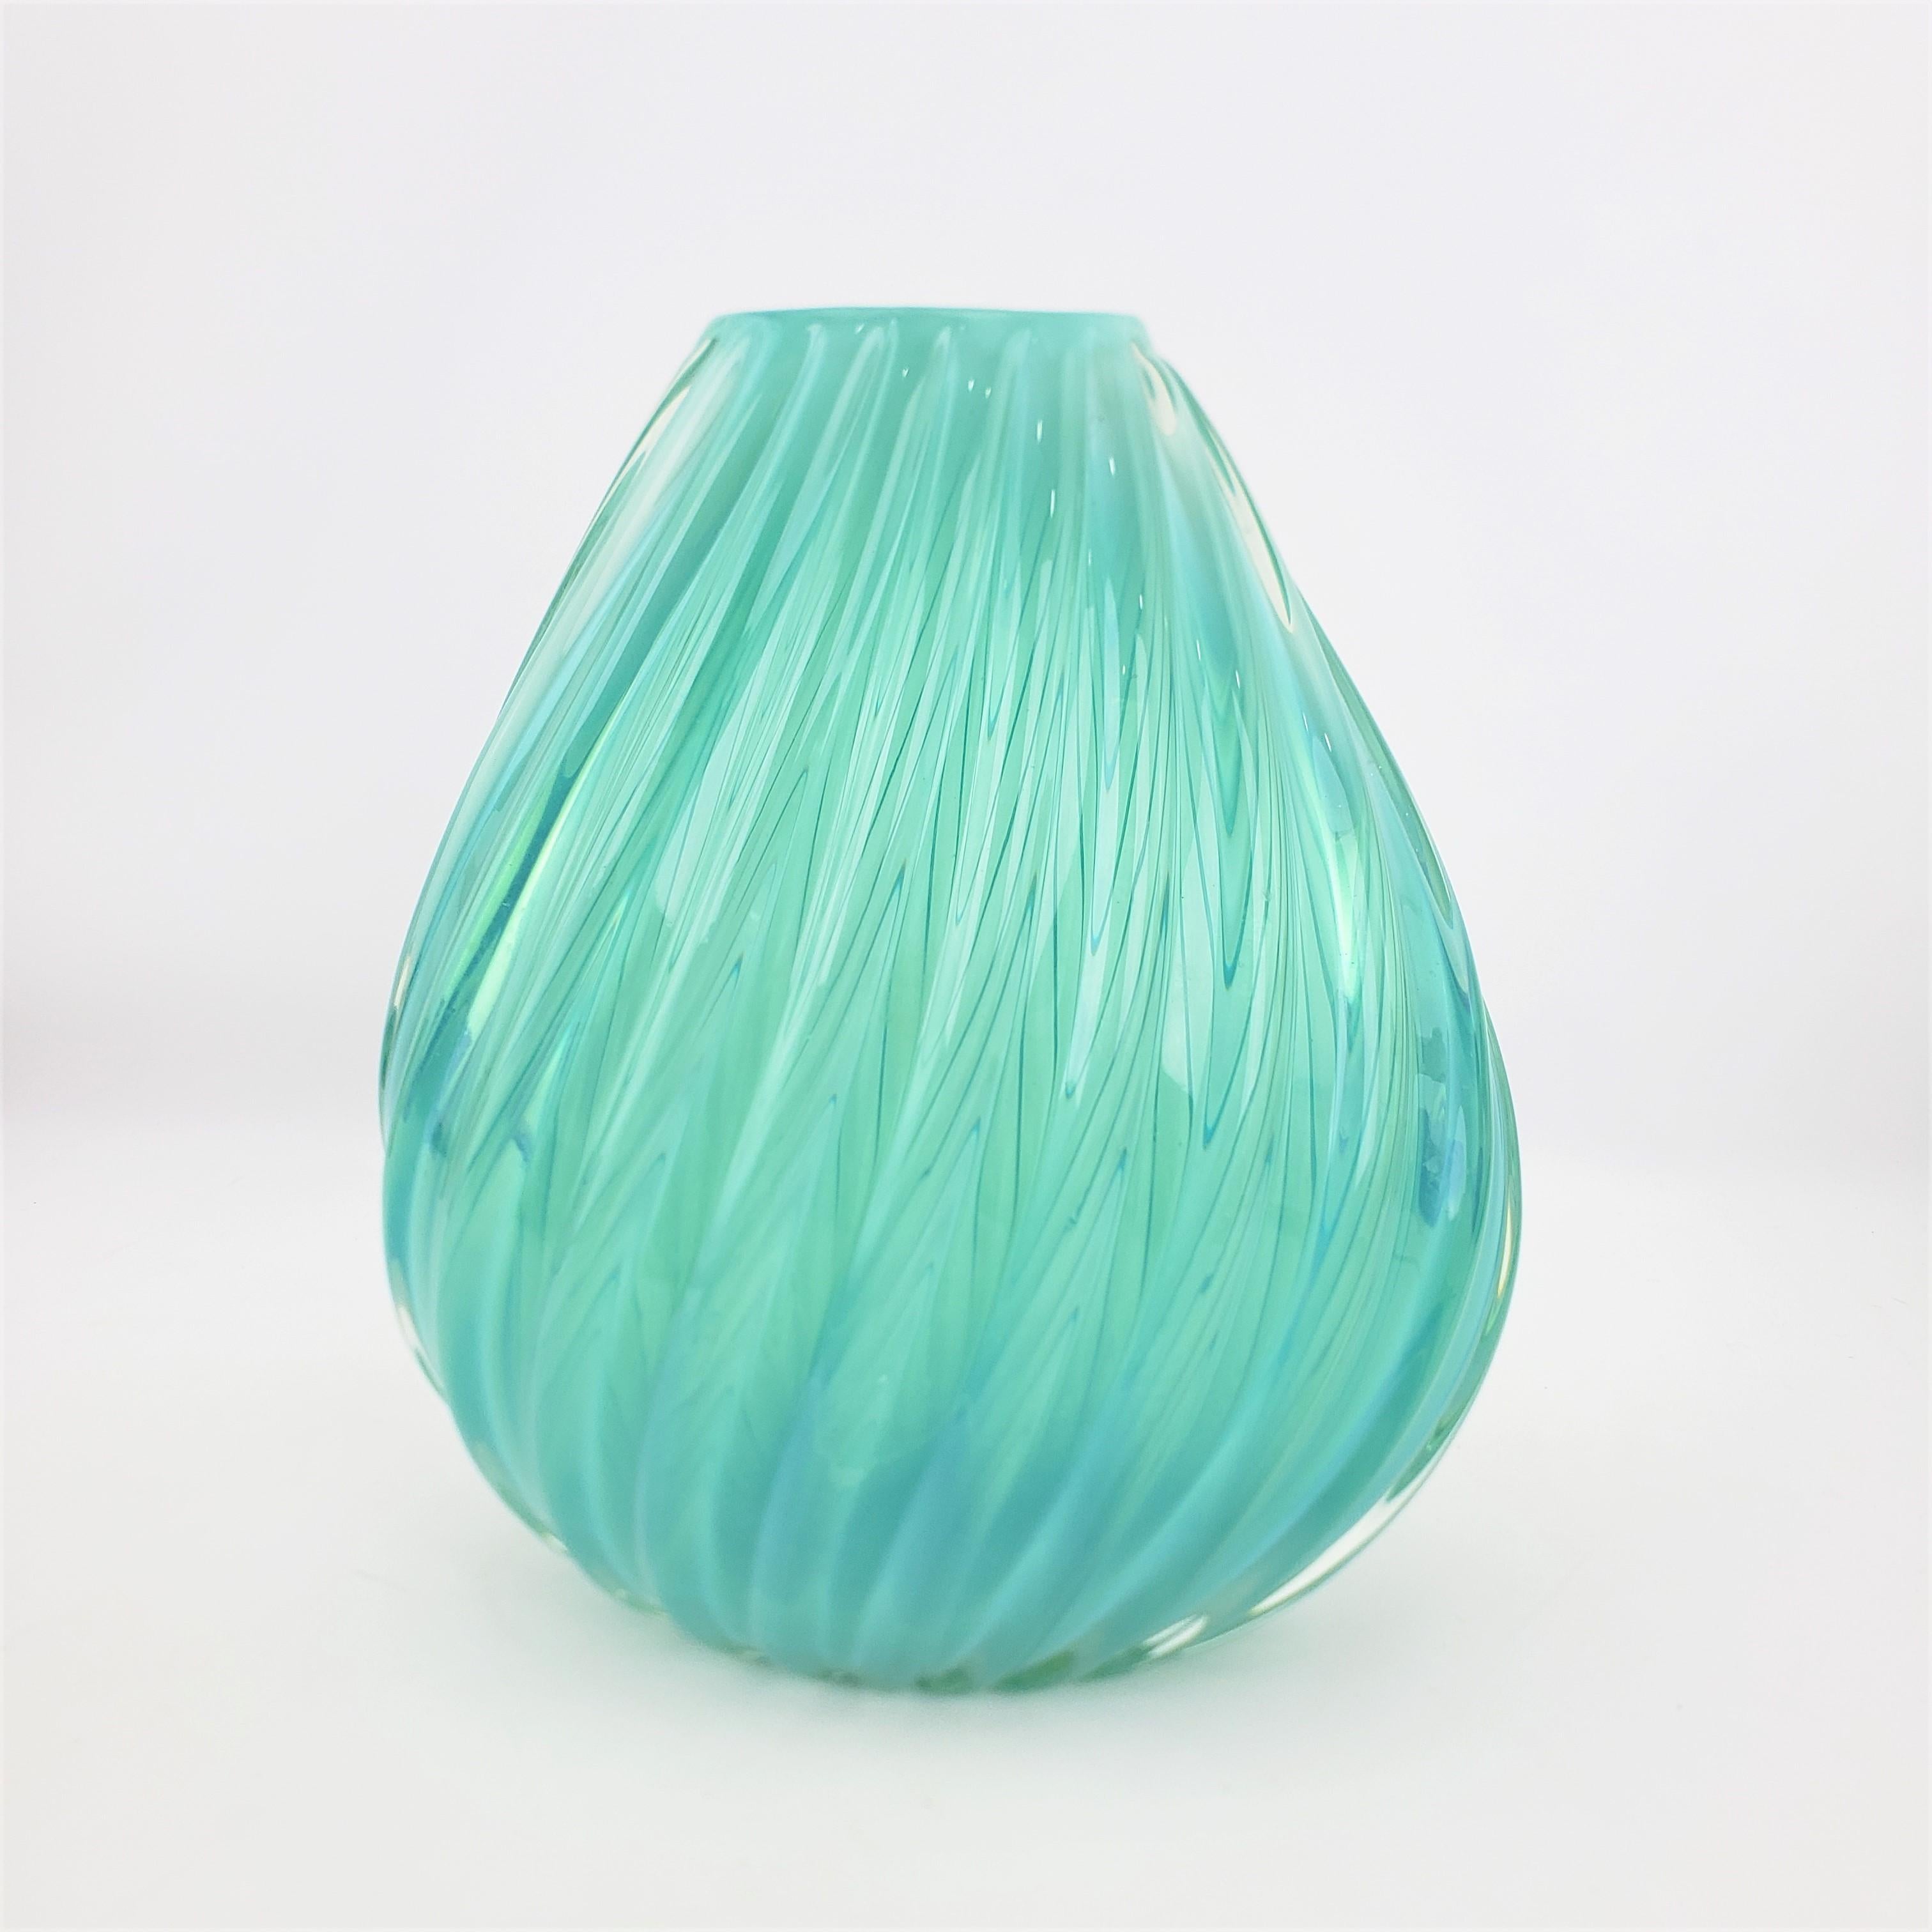 20th Century Mid-Century Modern Turquoise or Aquamarine Barovier Styled Ribbed Art Glass Vase For Sale